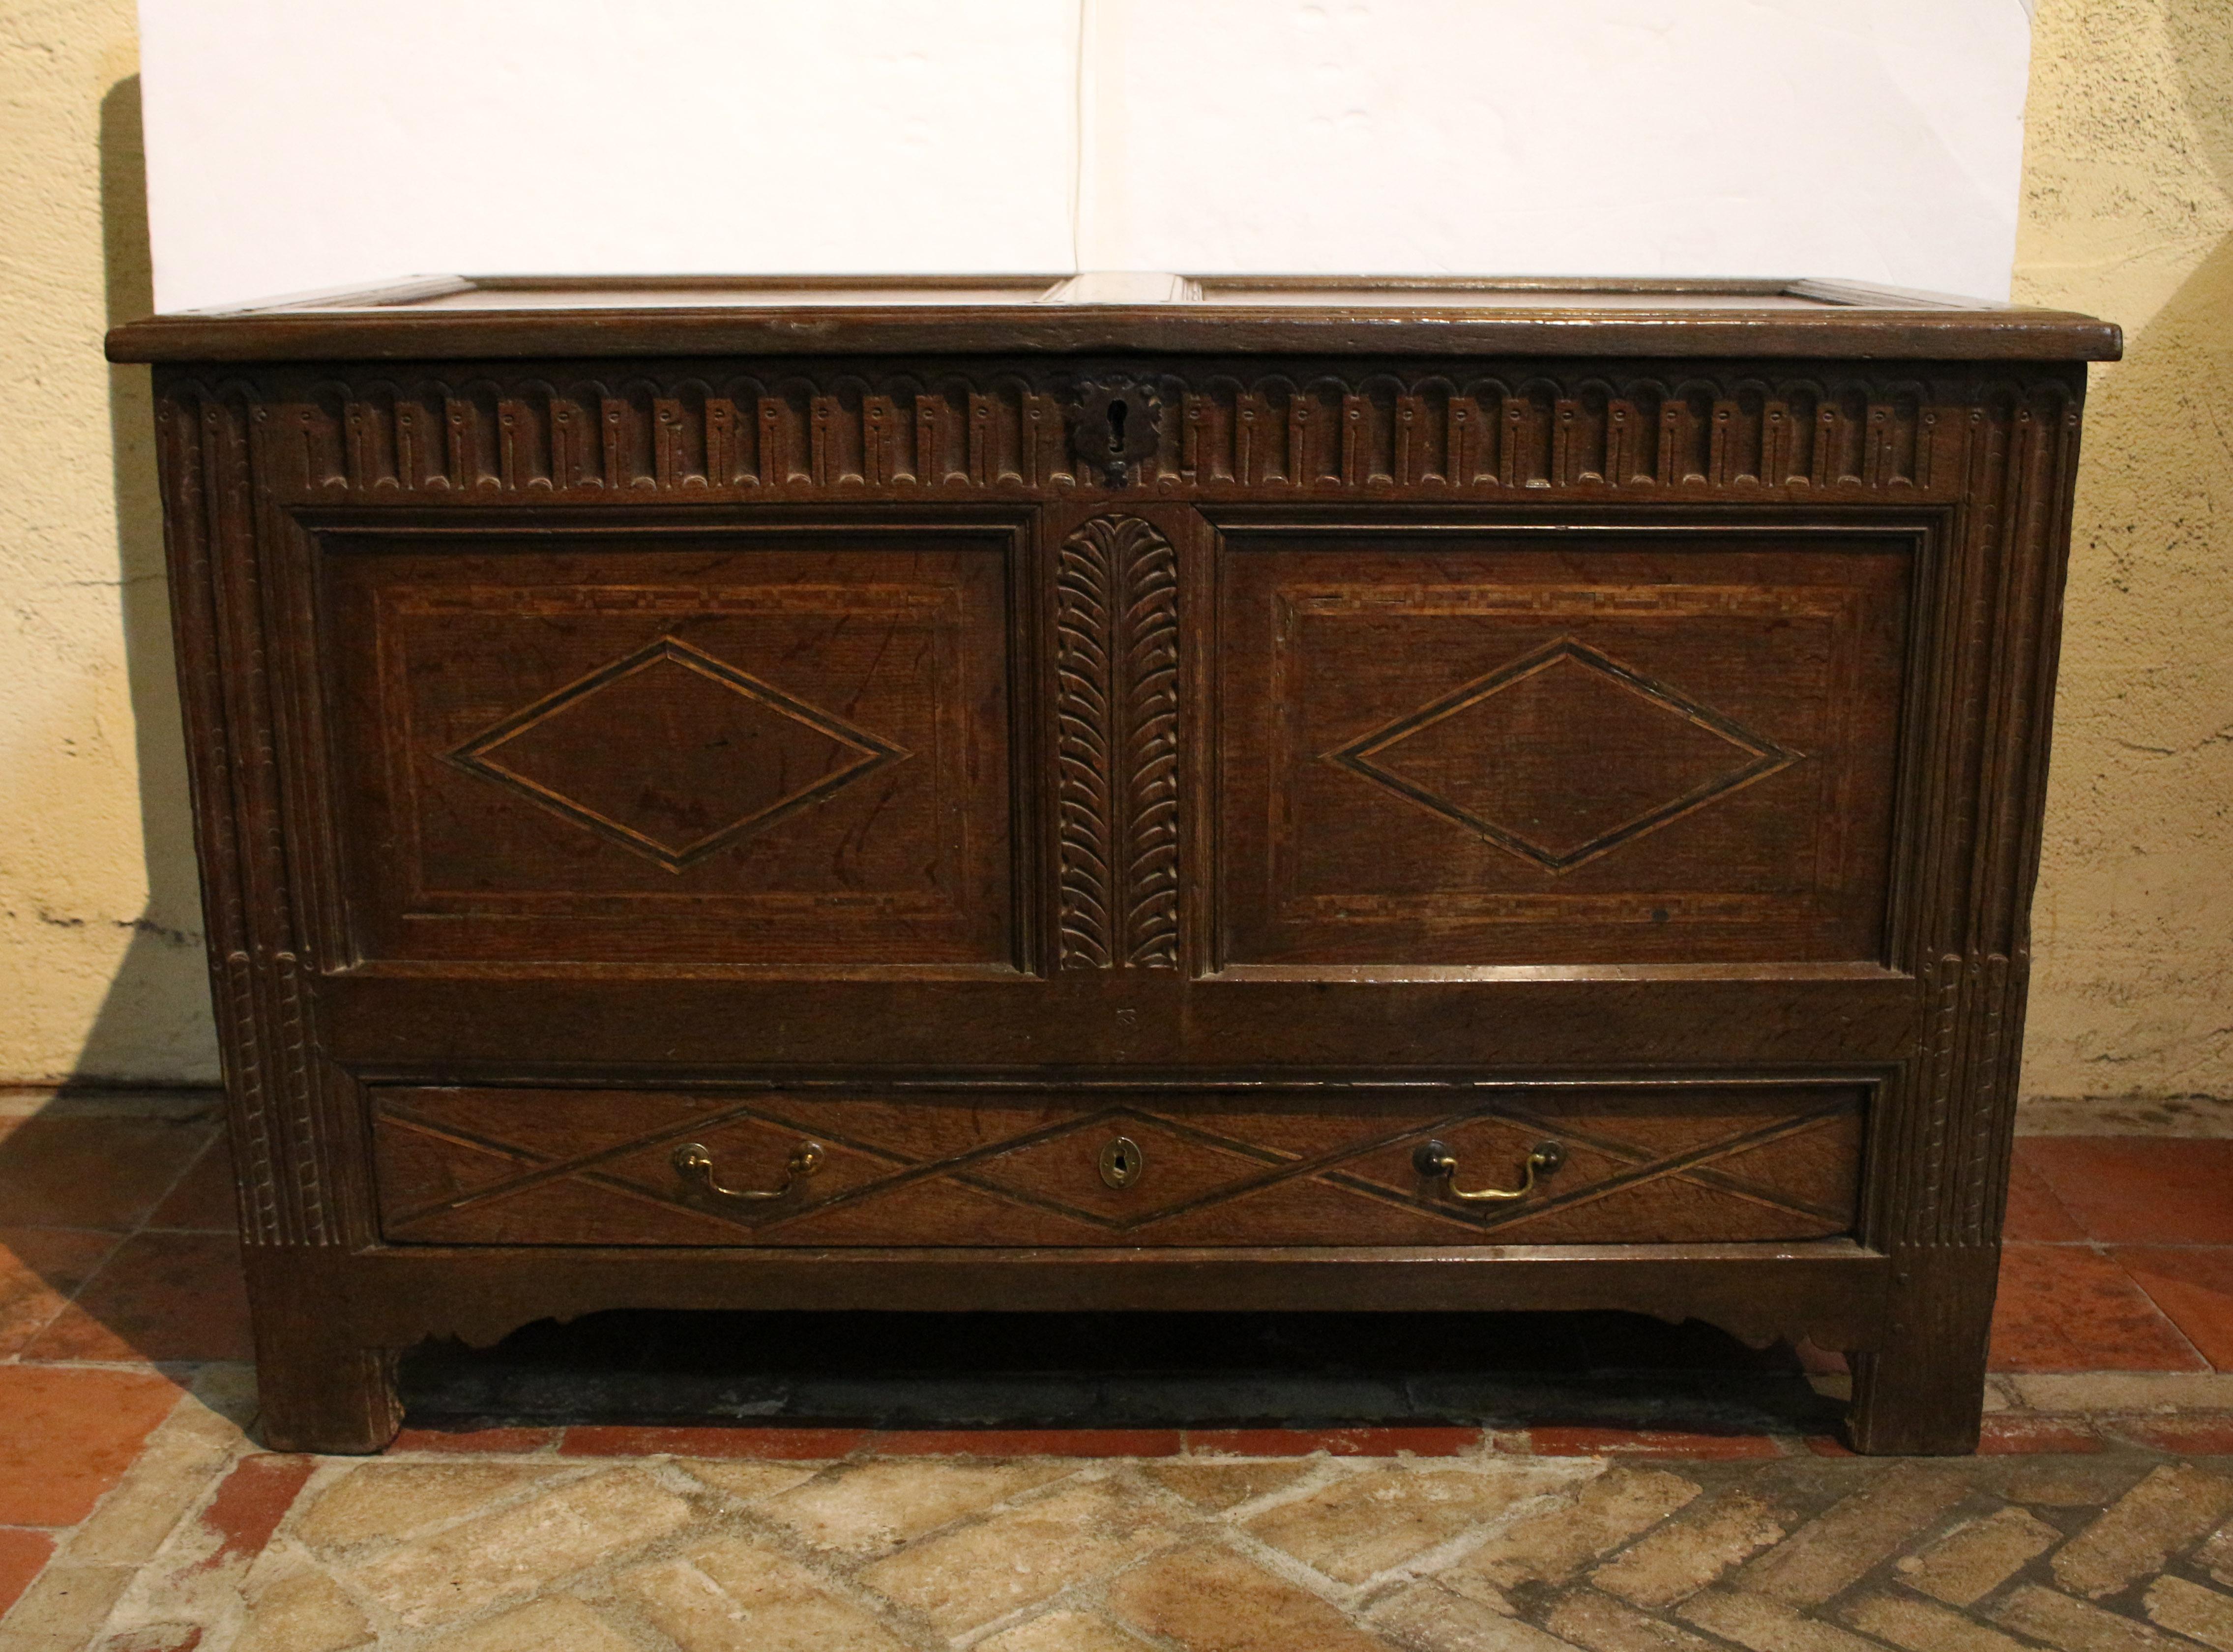 Early 18th century inlaid & carved coffer or lift top trunk, English. Coister carving across frieze beneath the well molded lift top and incorporated in elongated stop fluting form in the uprights. Diamond & parquetry inlay panels. Long bottom